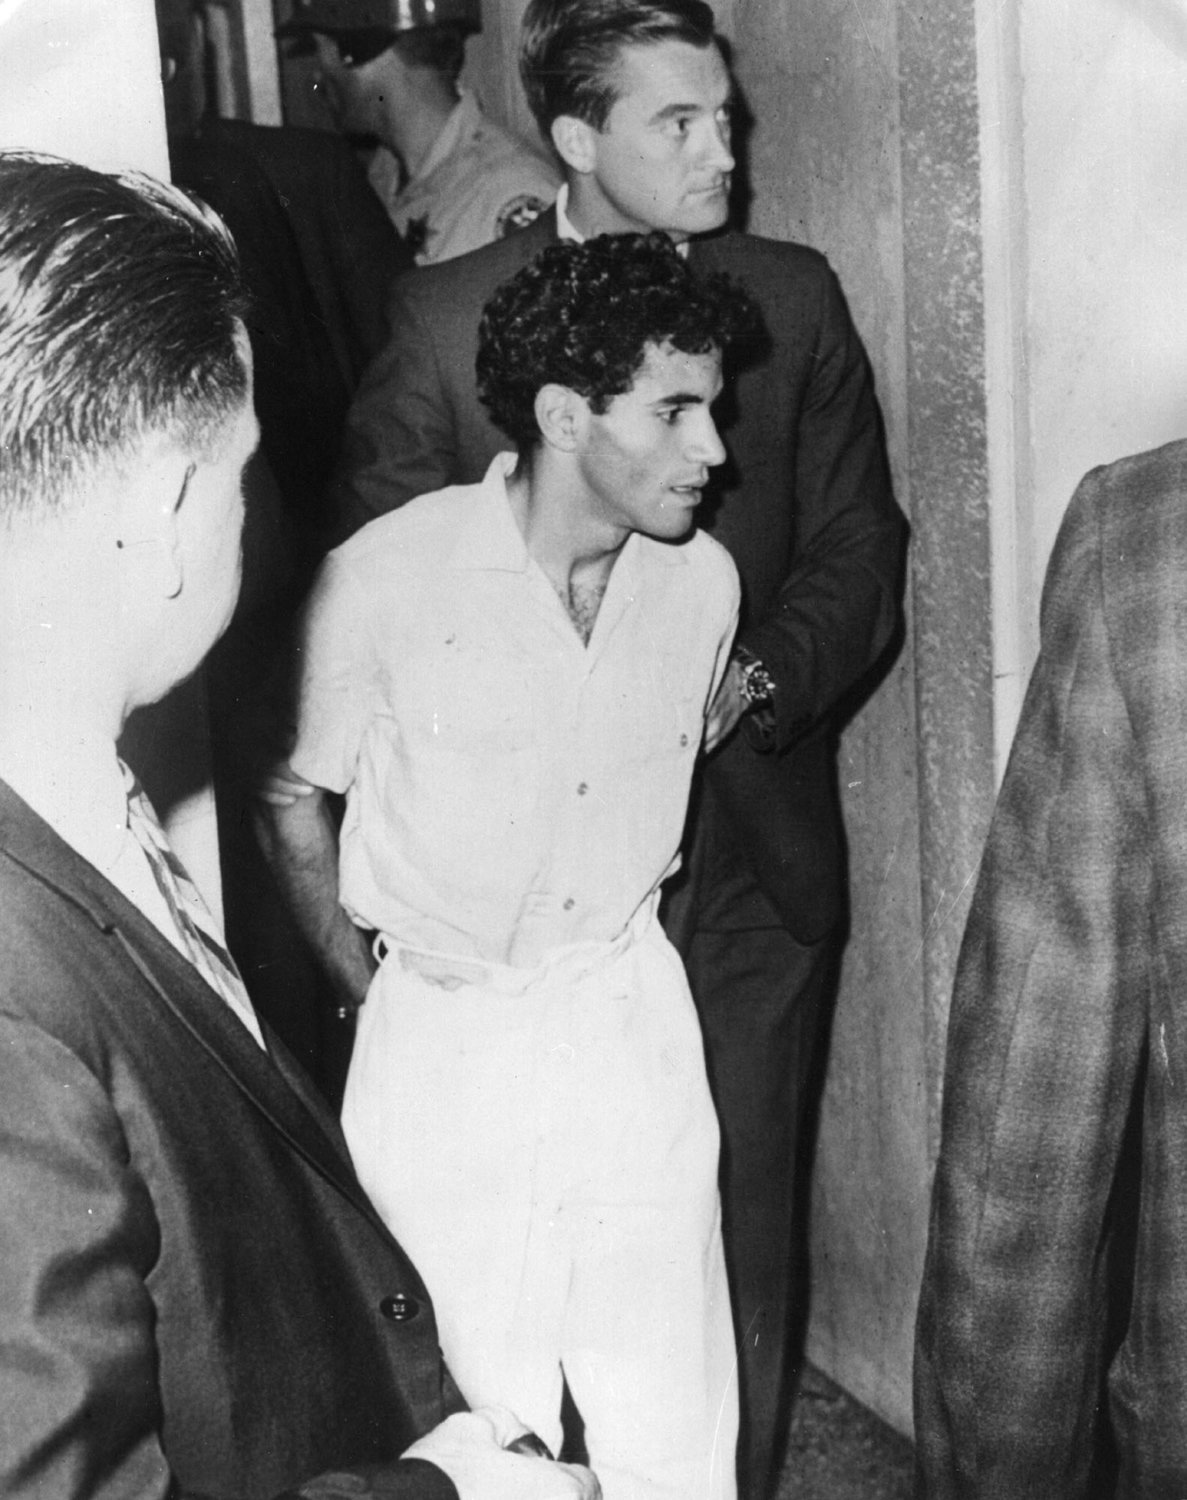 Sirhan Sirhan in custody in 1968 after the assassination of Sen. Robert Kennedy during a campaign stop in Los Angeles.  (Keystone/Getty Images/TNS)